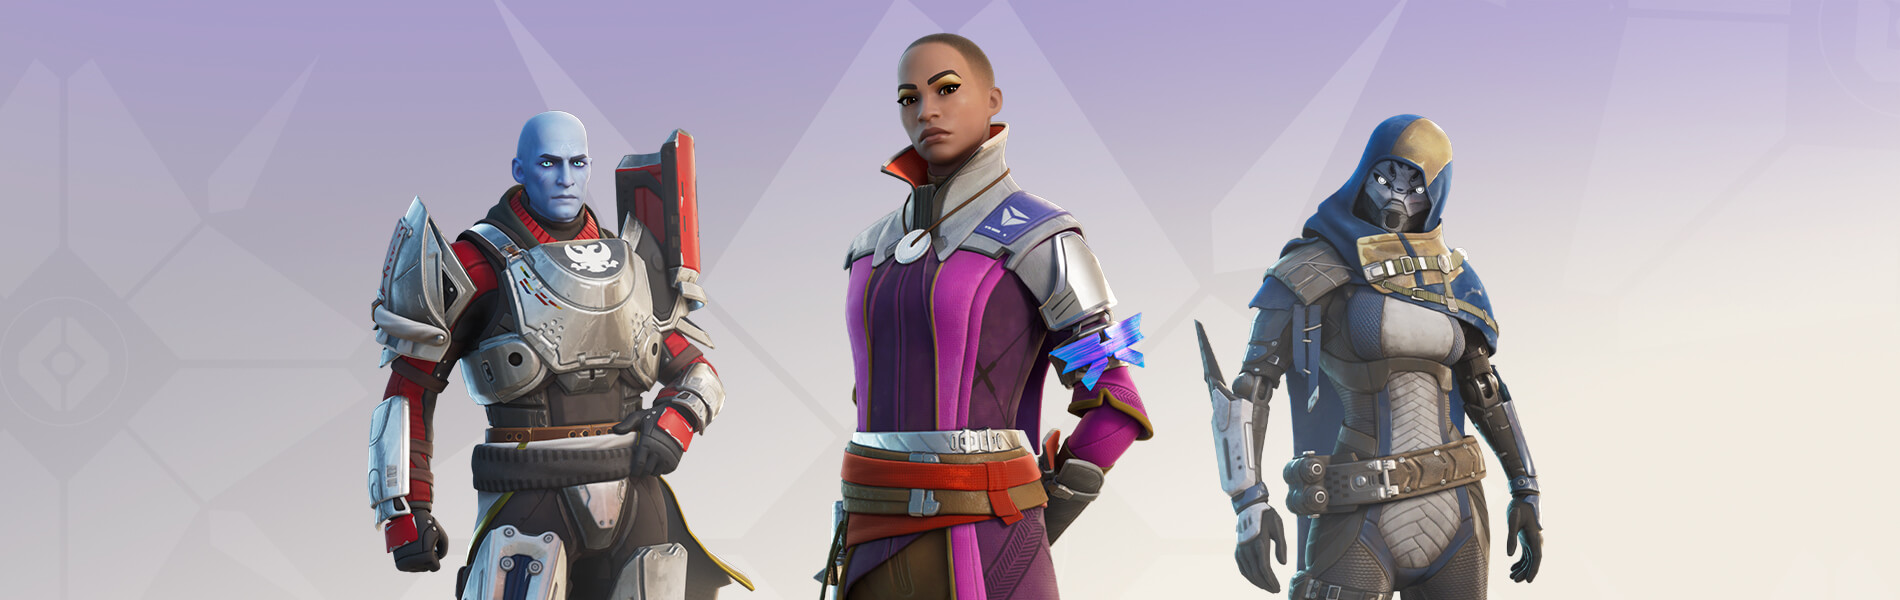 An image showing The Exo Stranger, Commander Zavala, and Ikora Rey recreated in Fortnite